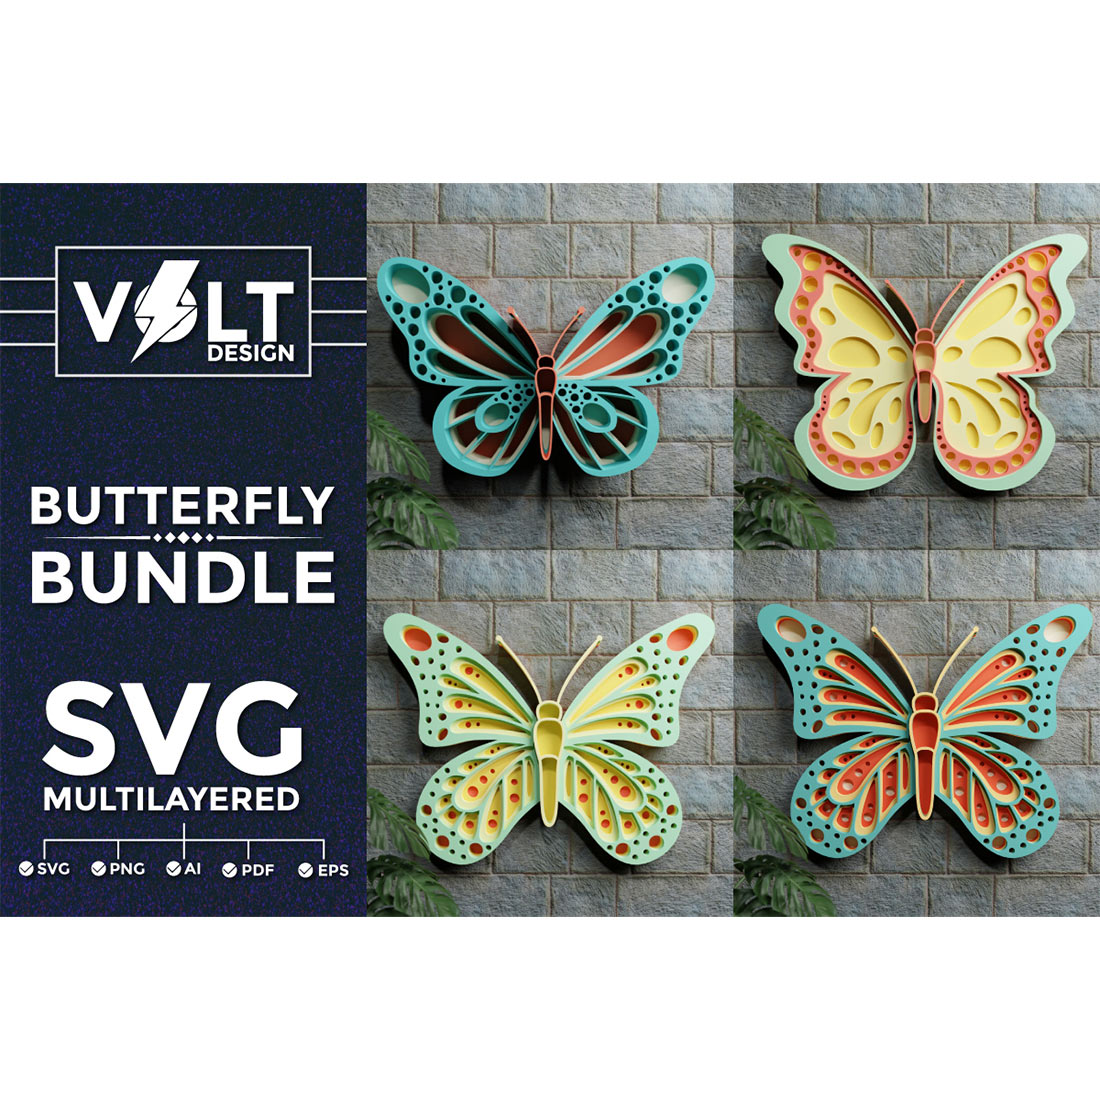 Butterfly 3D SVG Multilayered Bundle preview image.